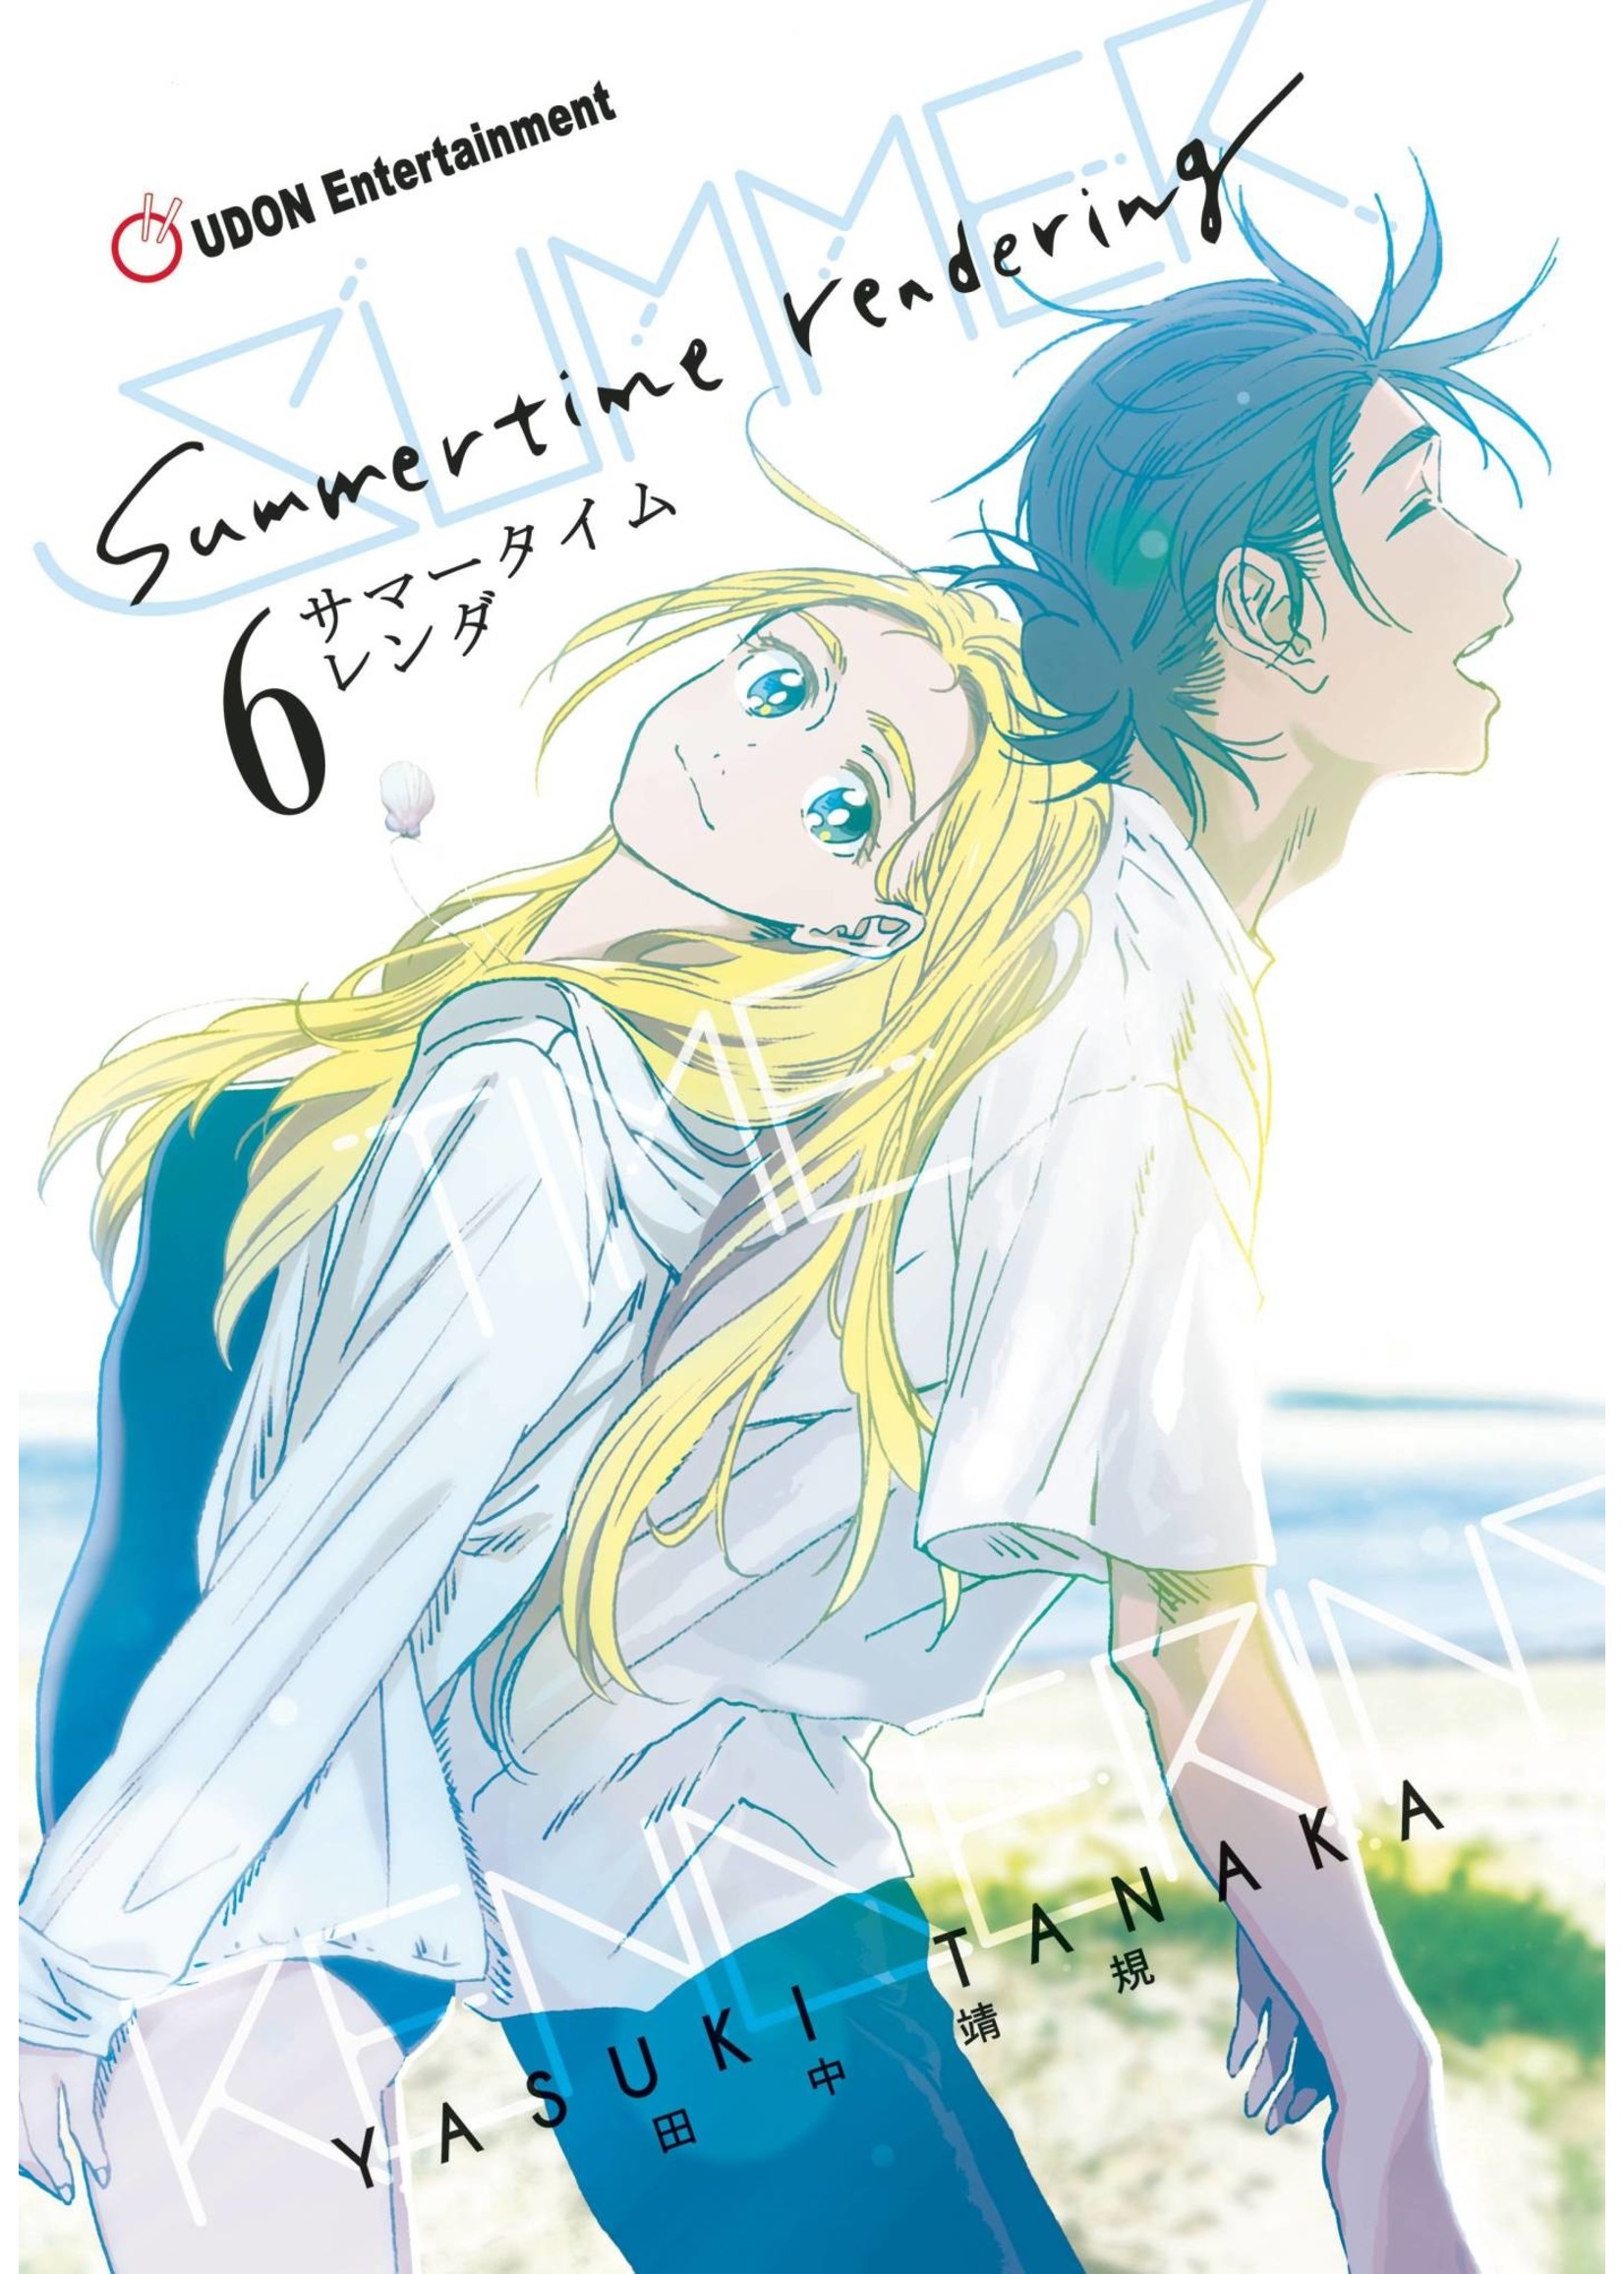 UDON ENTERTAINMENT INC SUMMERTIME RENDERING TP VOL 06 (OF 6) (MR)